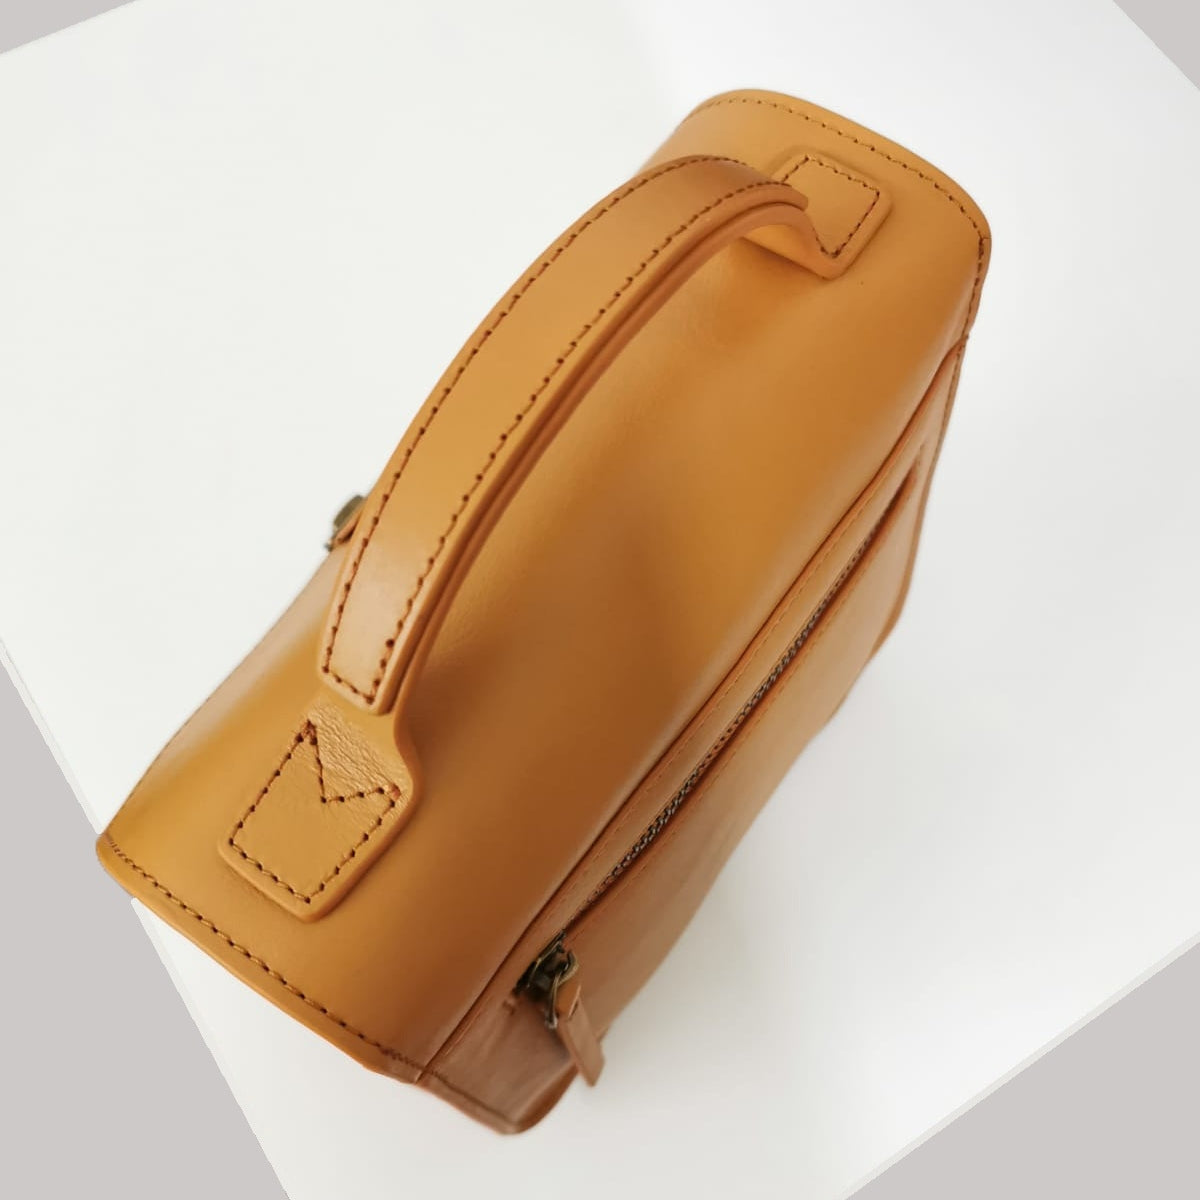 Leather crossbody bag in tan colour